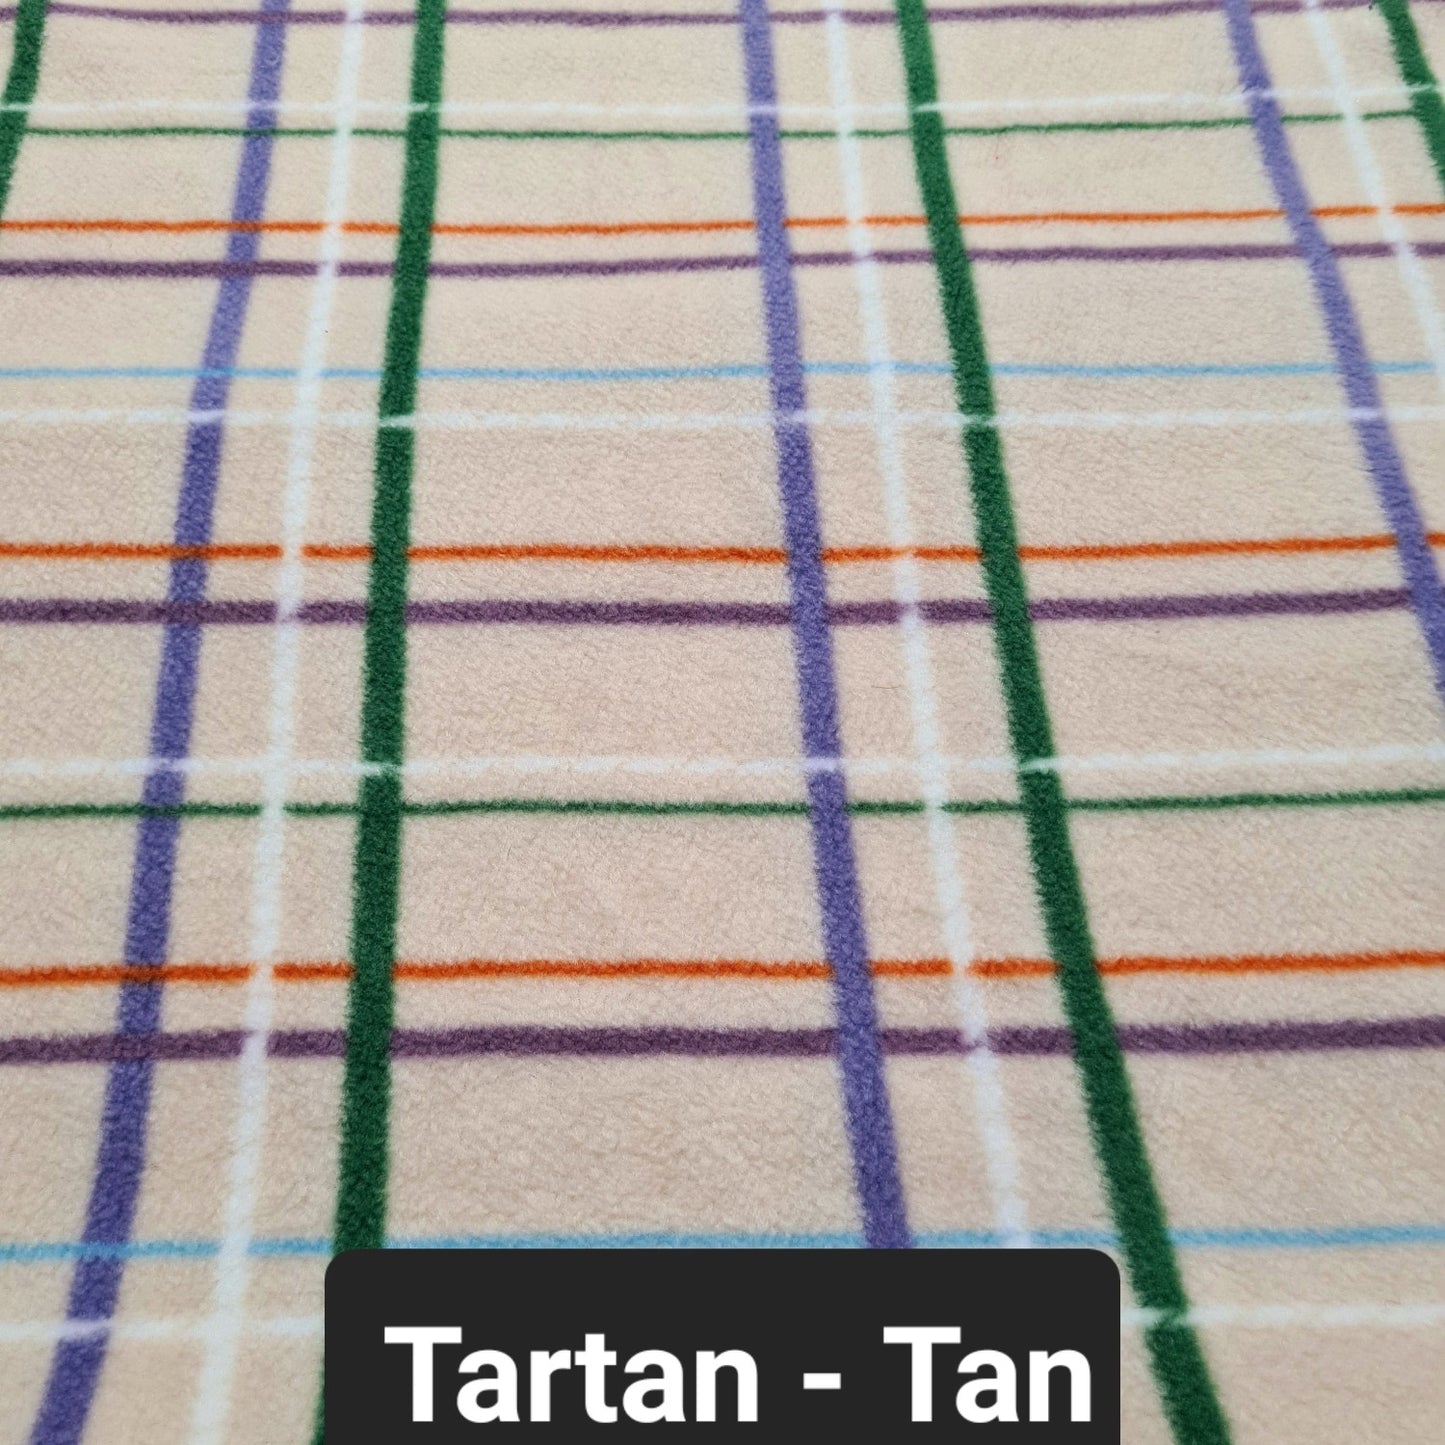 Cream coloured fabric with purple, whit and green checks